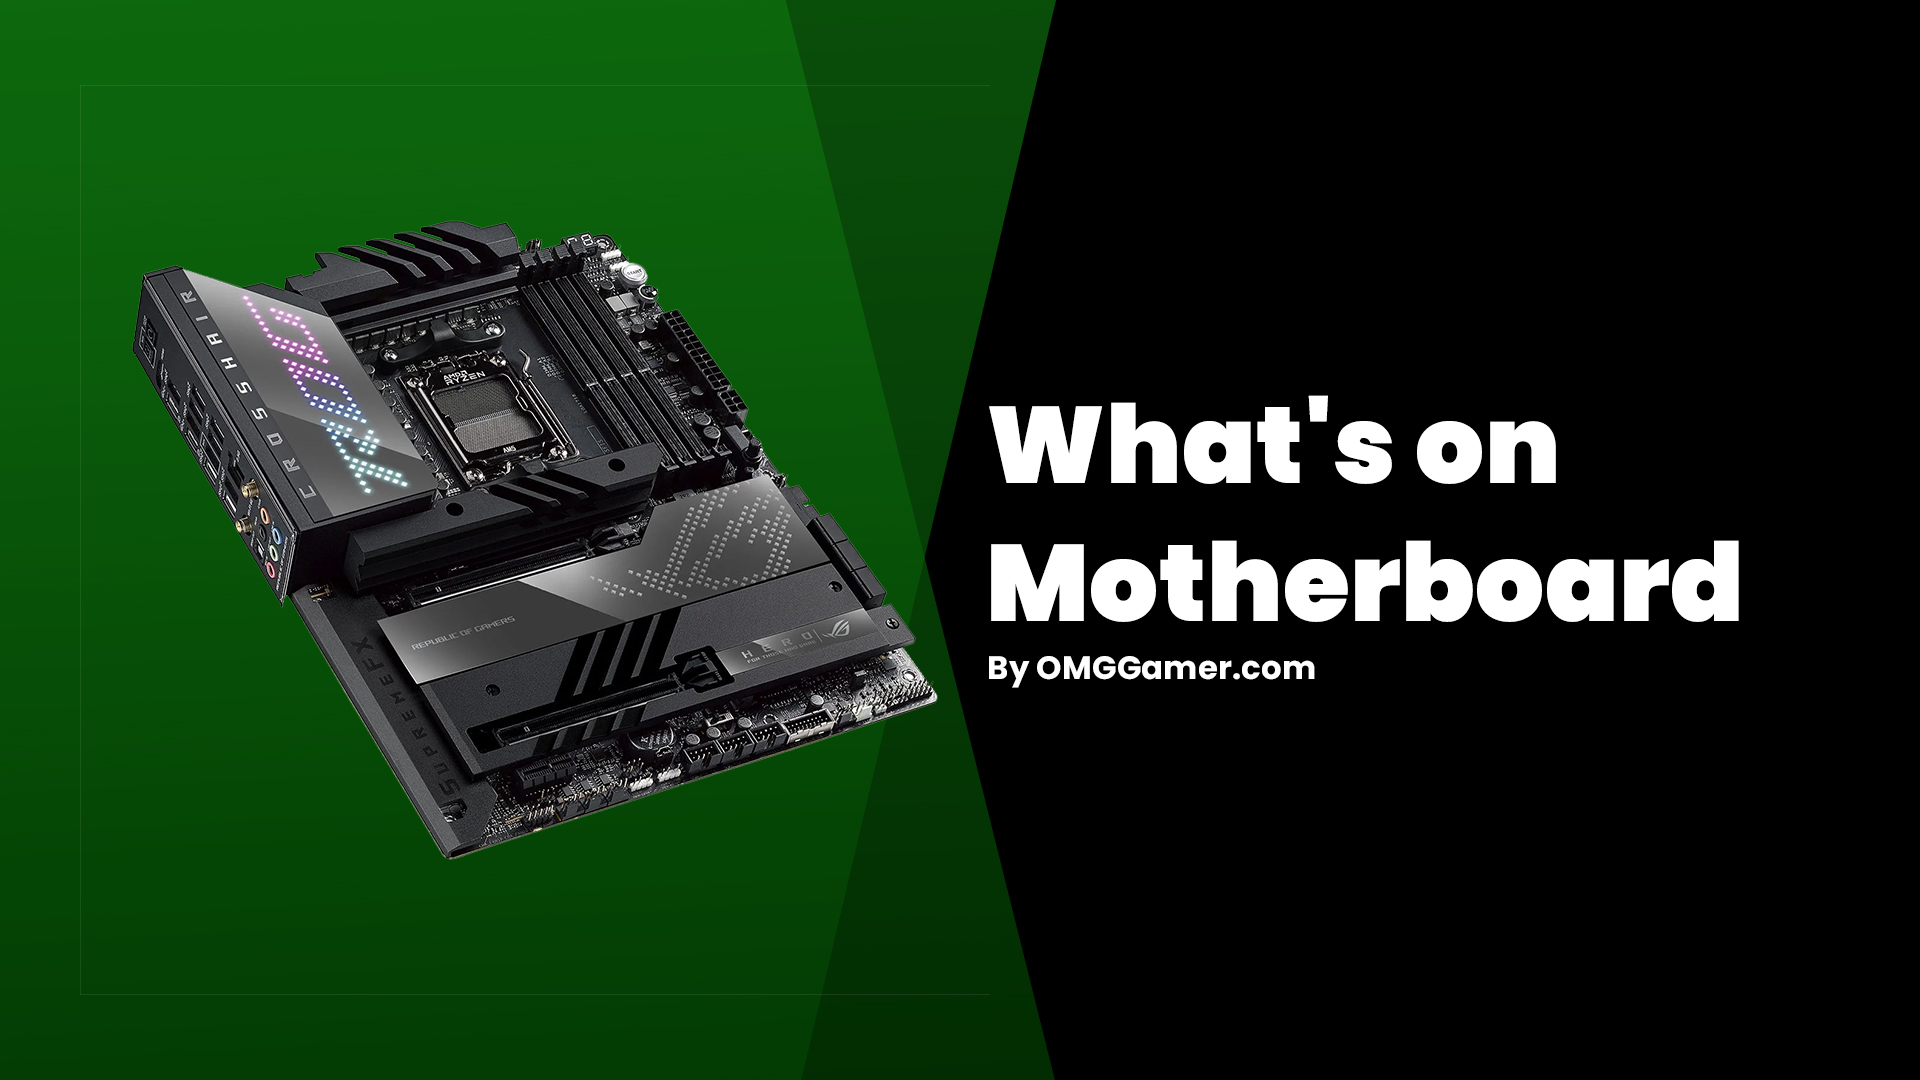 What's on Motherboard